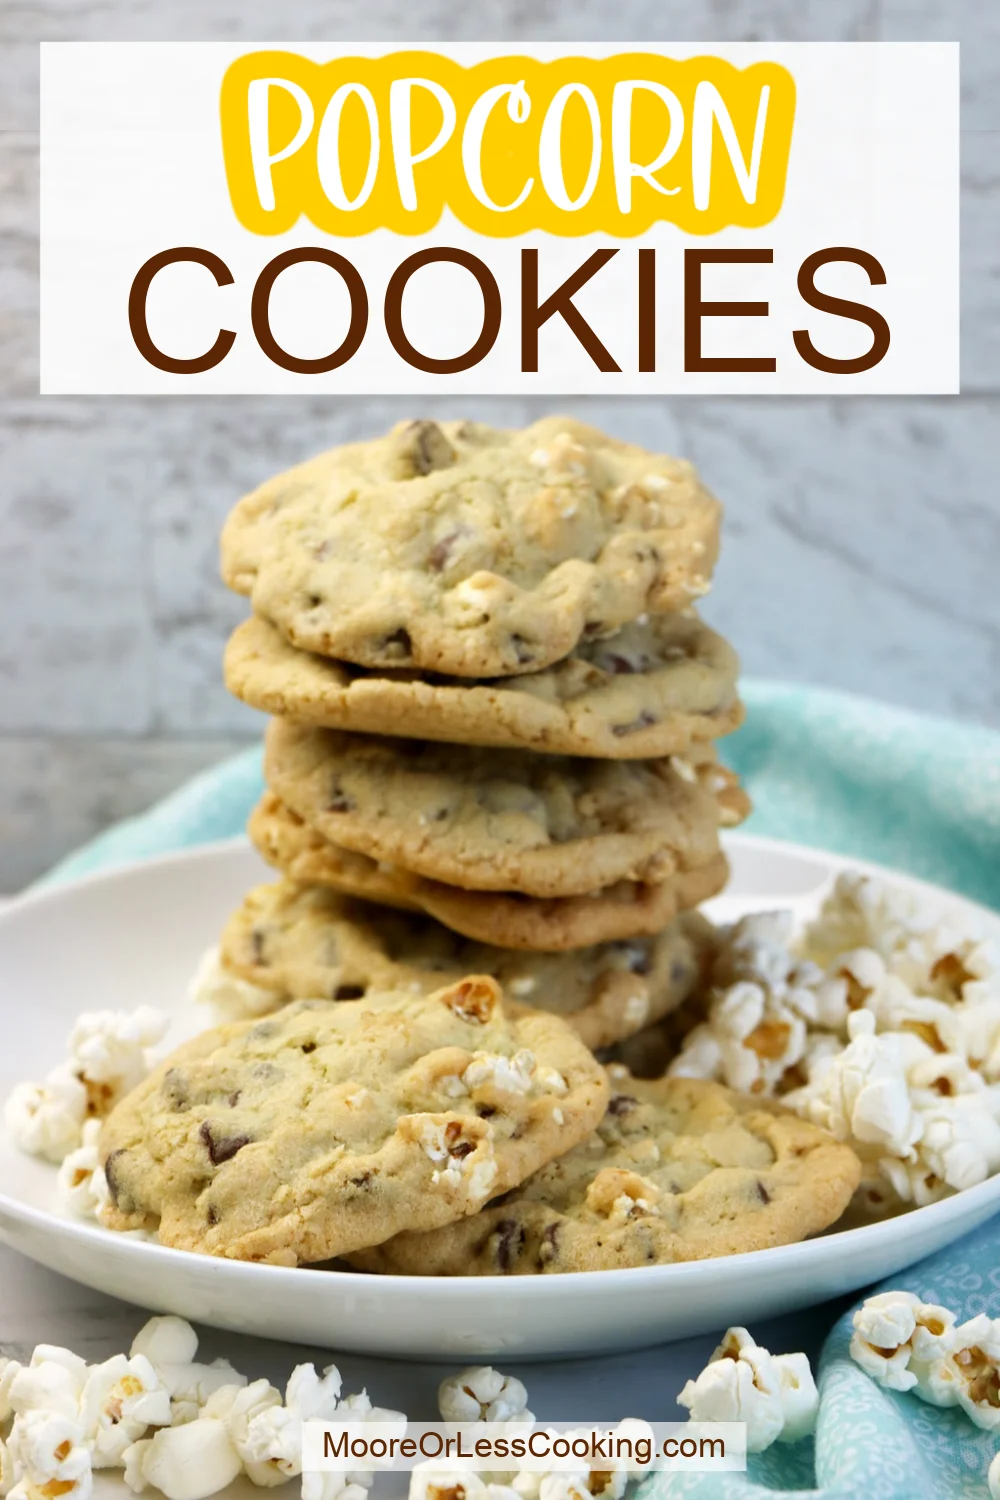 Sweet, chocolatey, buttery, and crunchy make these Popcorn Cookies the ultimate satisfying treat. It's a chocolate chip cookie that's stuffed with popcorn for an epic combination that's simply scrumptious. via @Mooreorlesscook